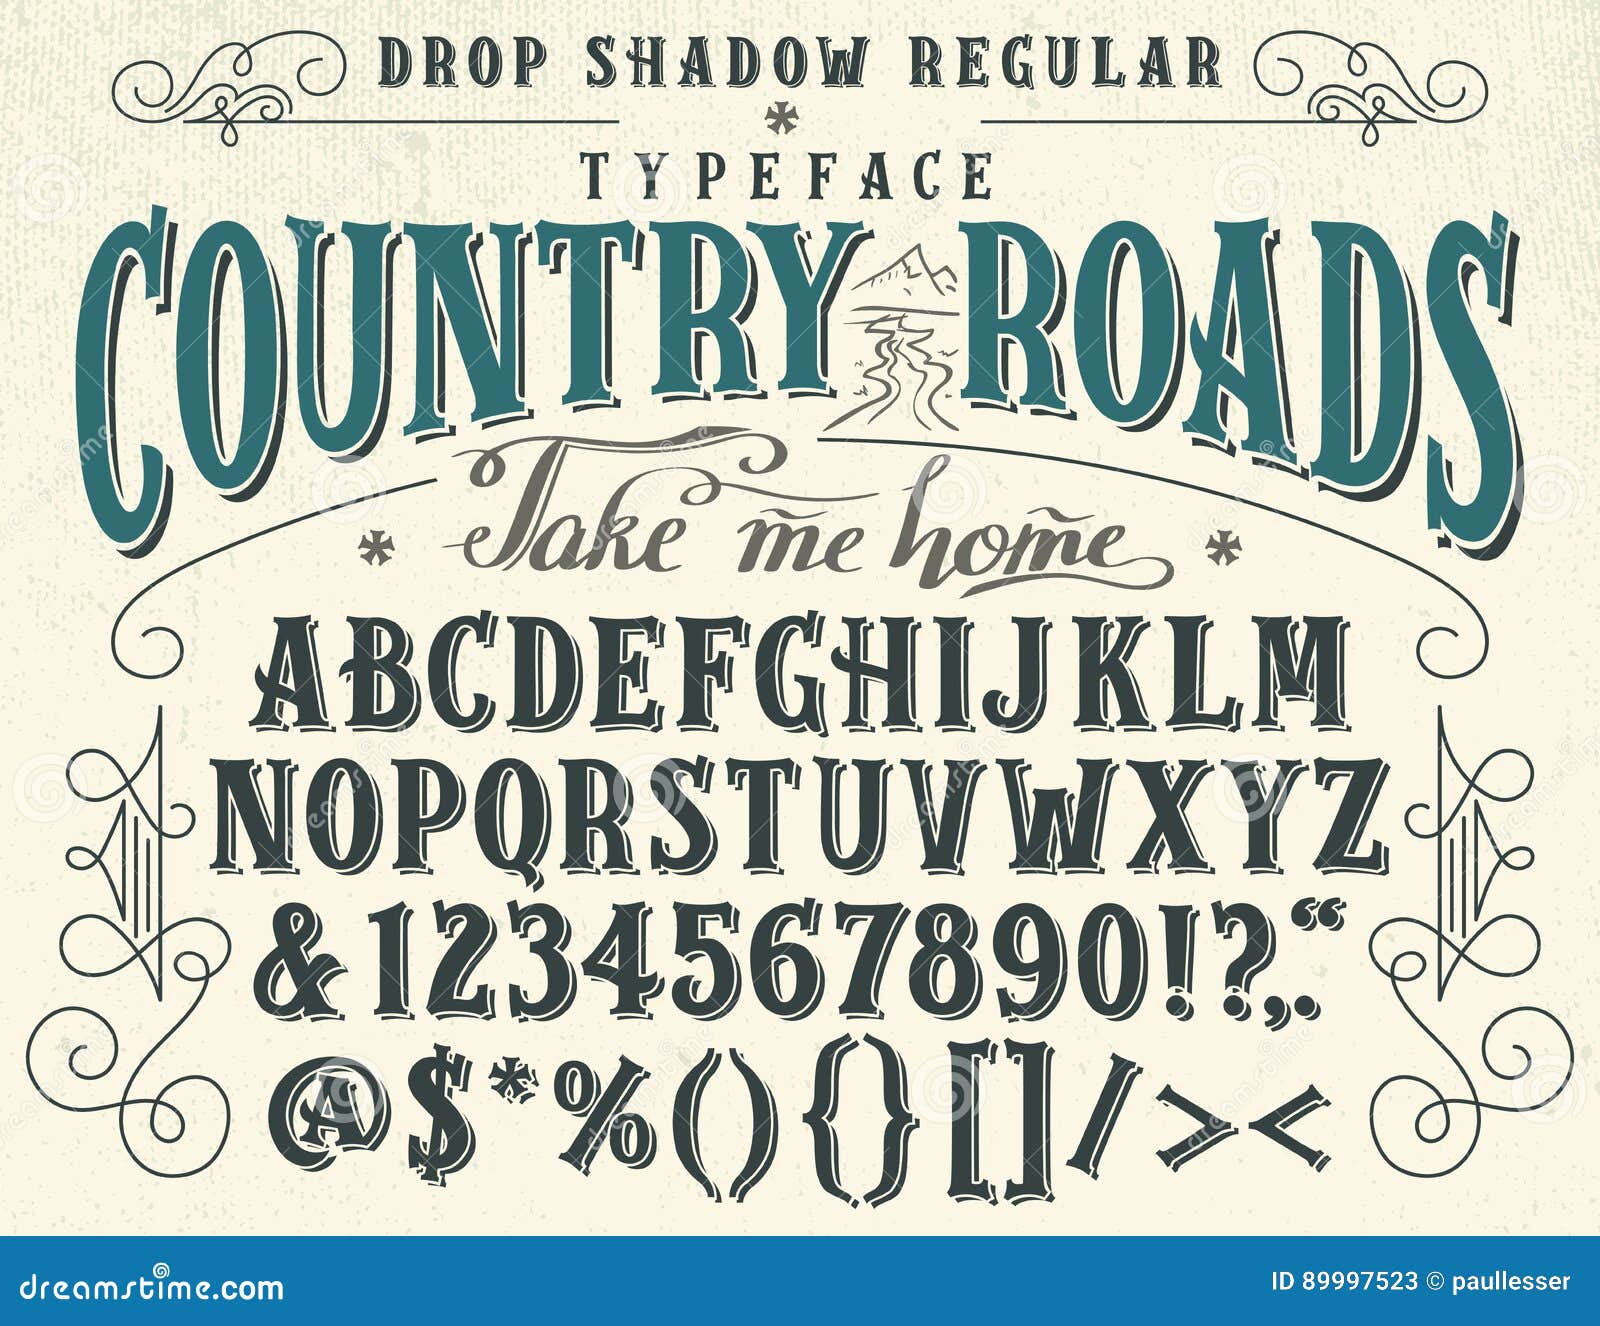 country roads handcrafted retro typeface